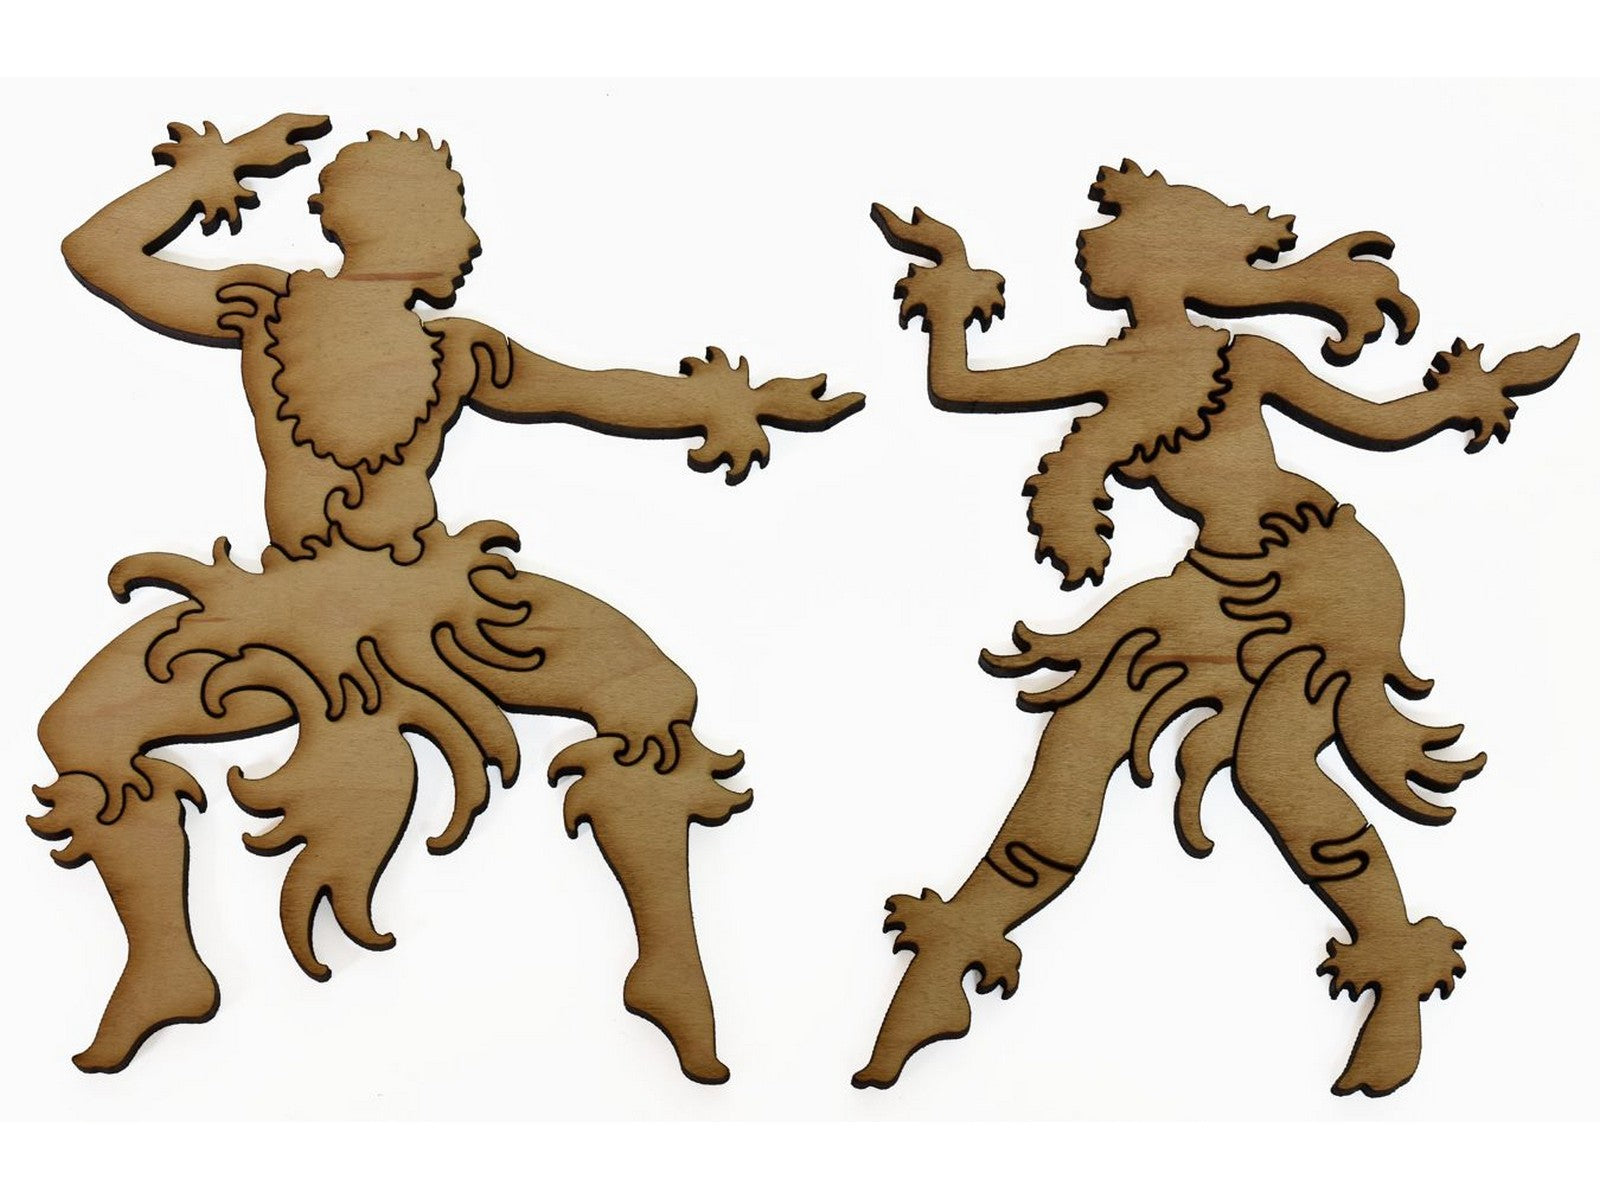 A closeup of pieces showing two multi-piece people dancing.